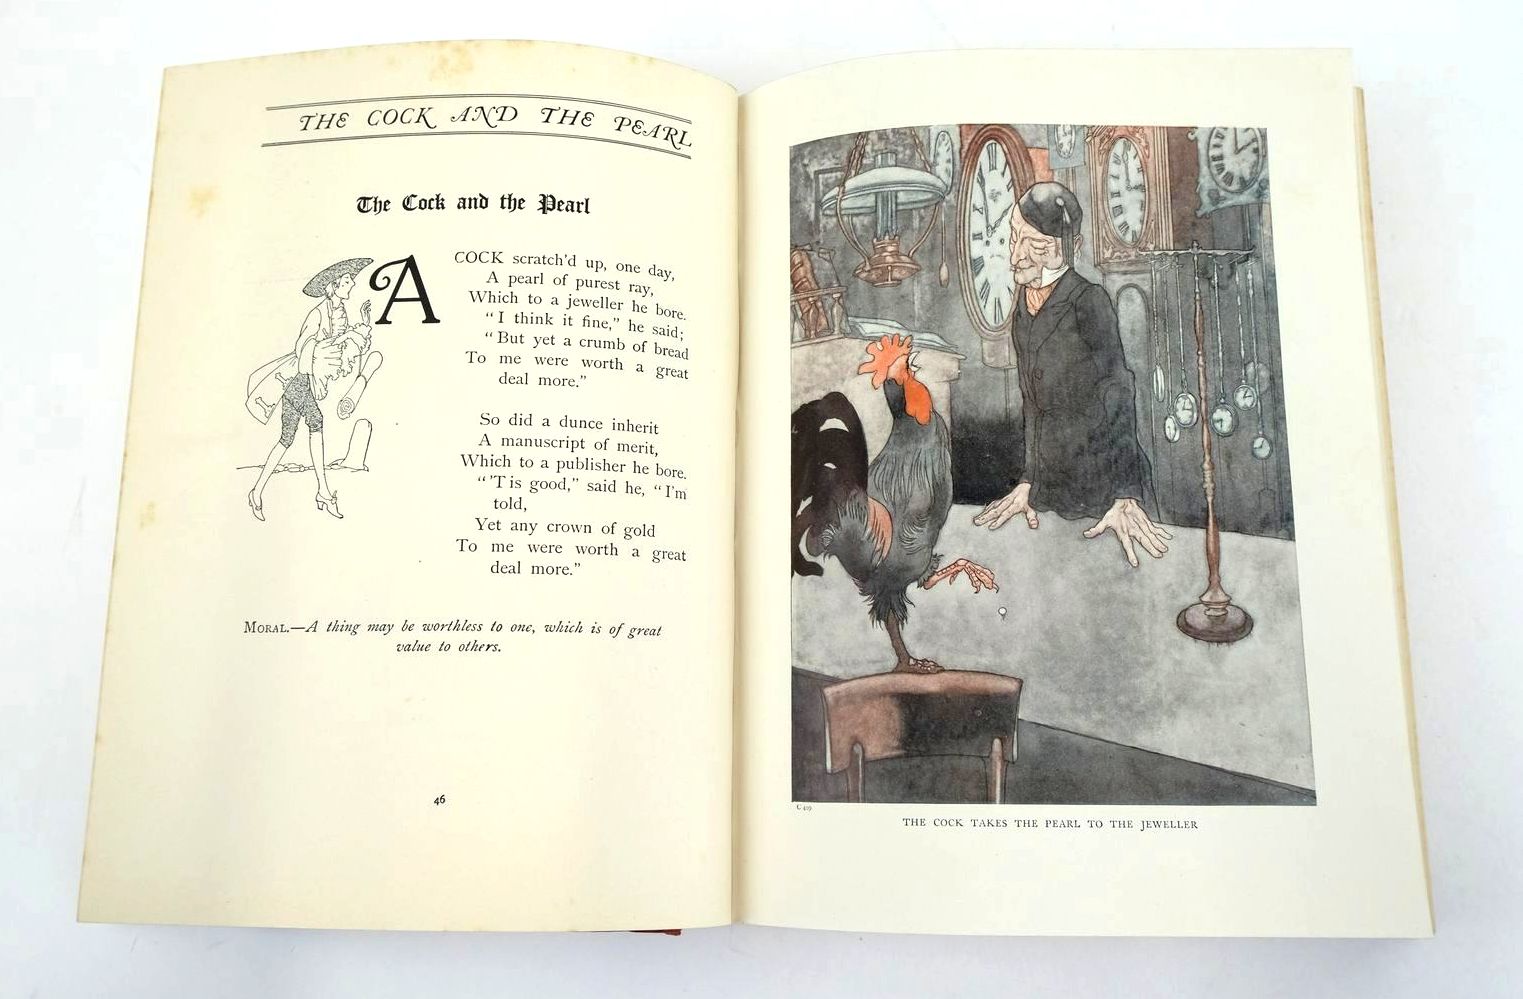 Photo of THE BIG BOOK OF FABLES written by Jerrold, Walter illustrated by Robinson, Charles published by Blackie & Son Ltd. (STOCK CODE: 1324333)  for sale by Stella & Rose's Books